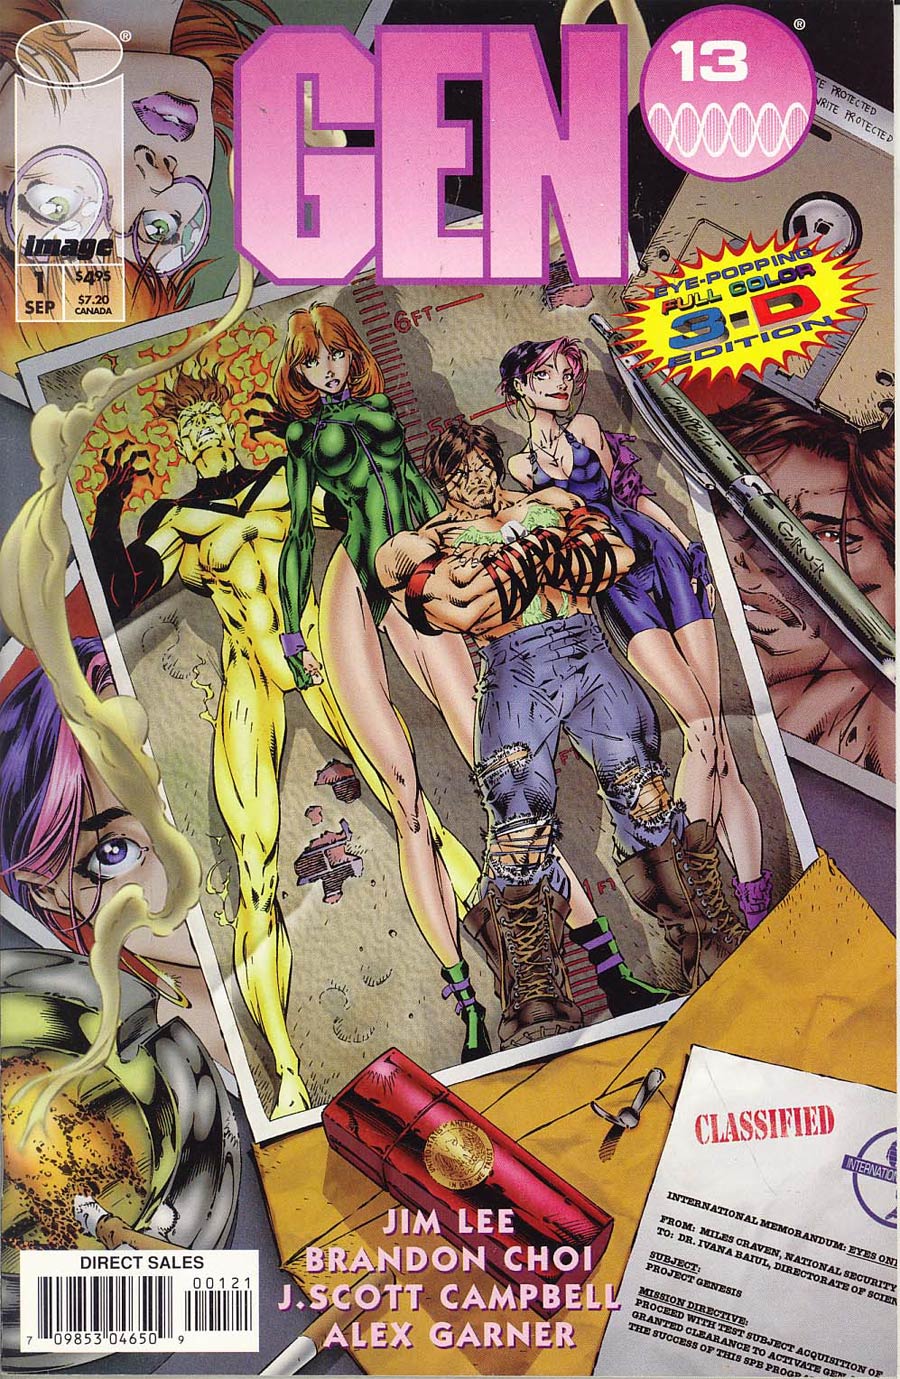 Gen 13 #1 Cover F 3-D Edition Without Glasses